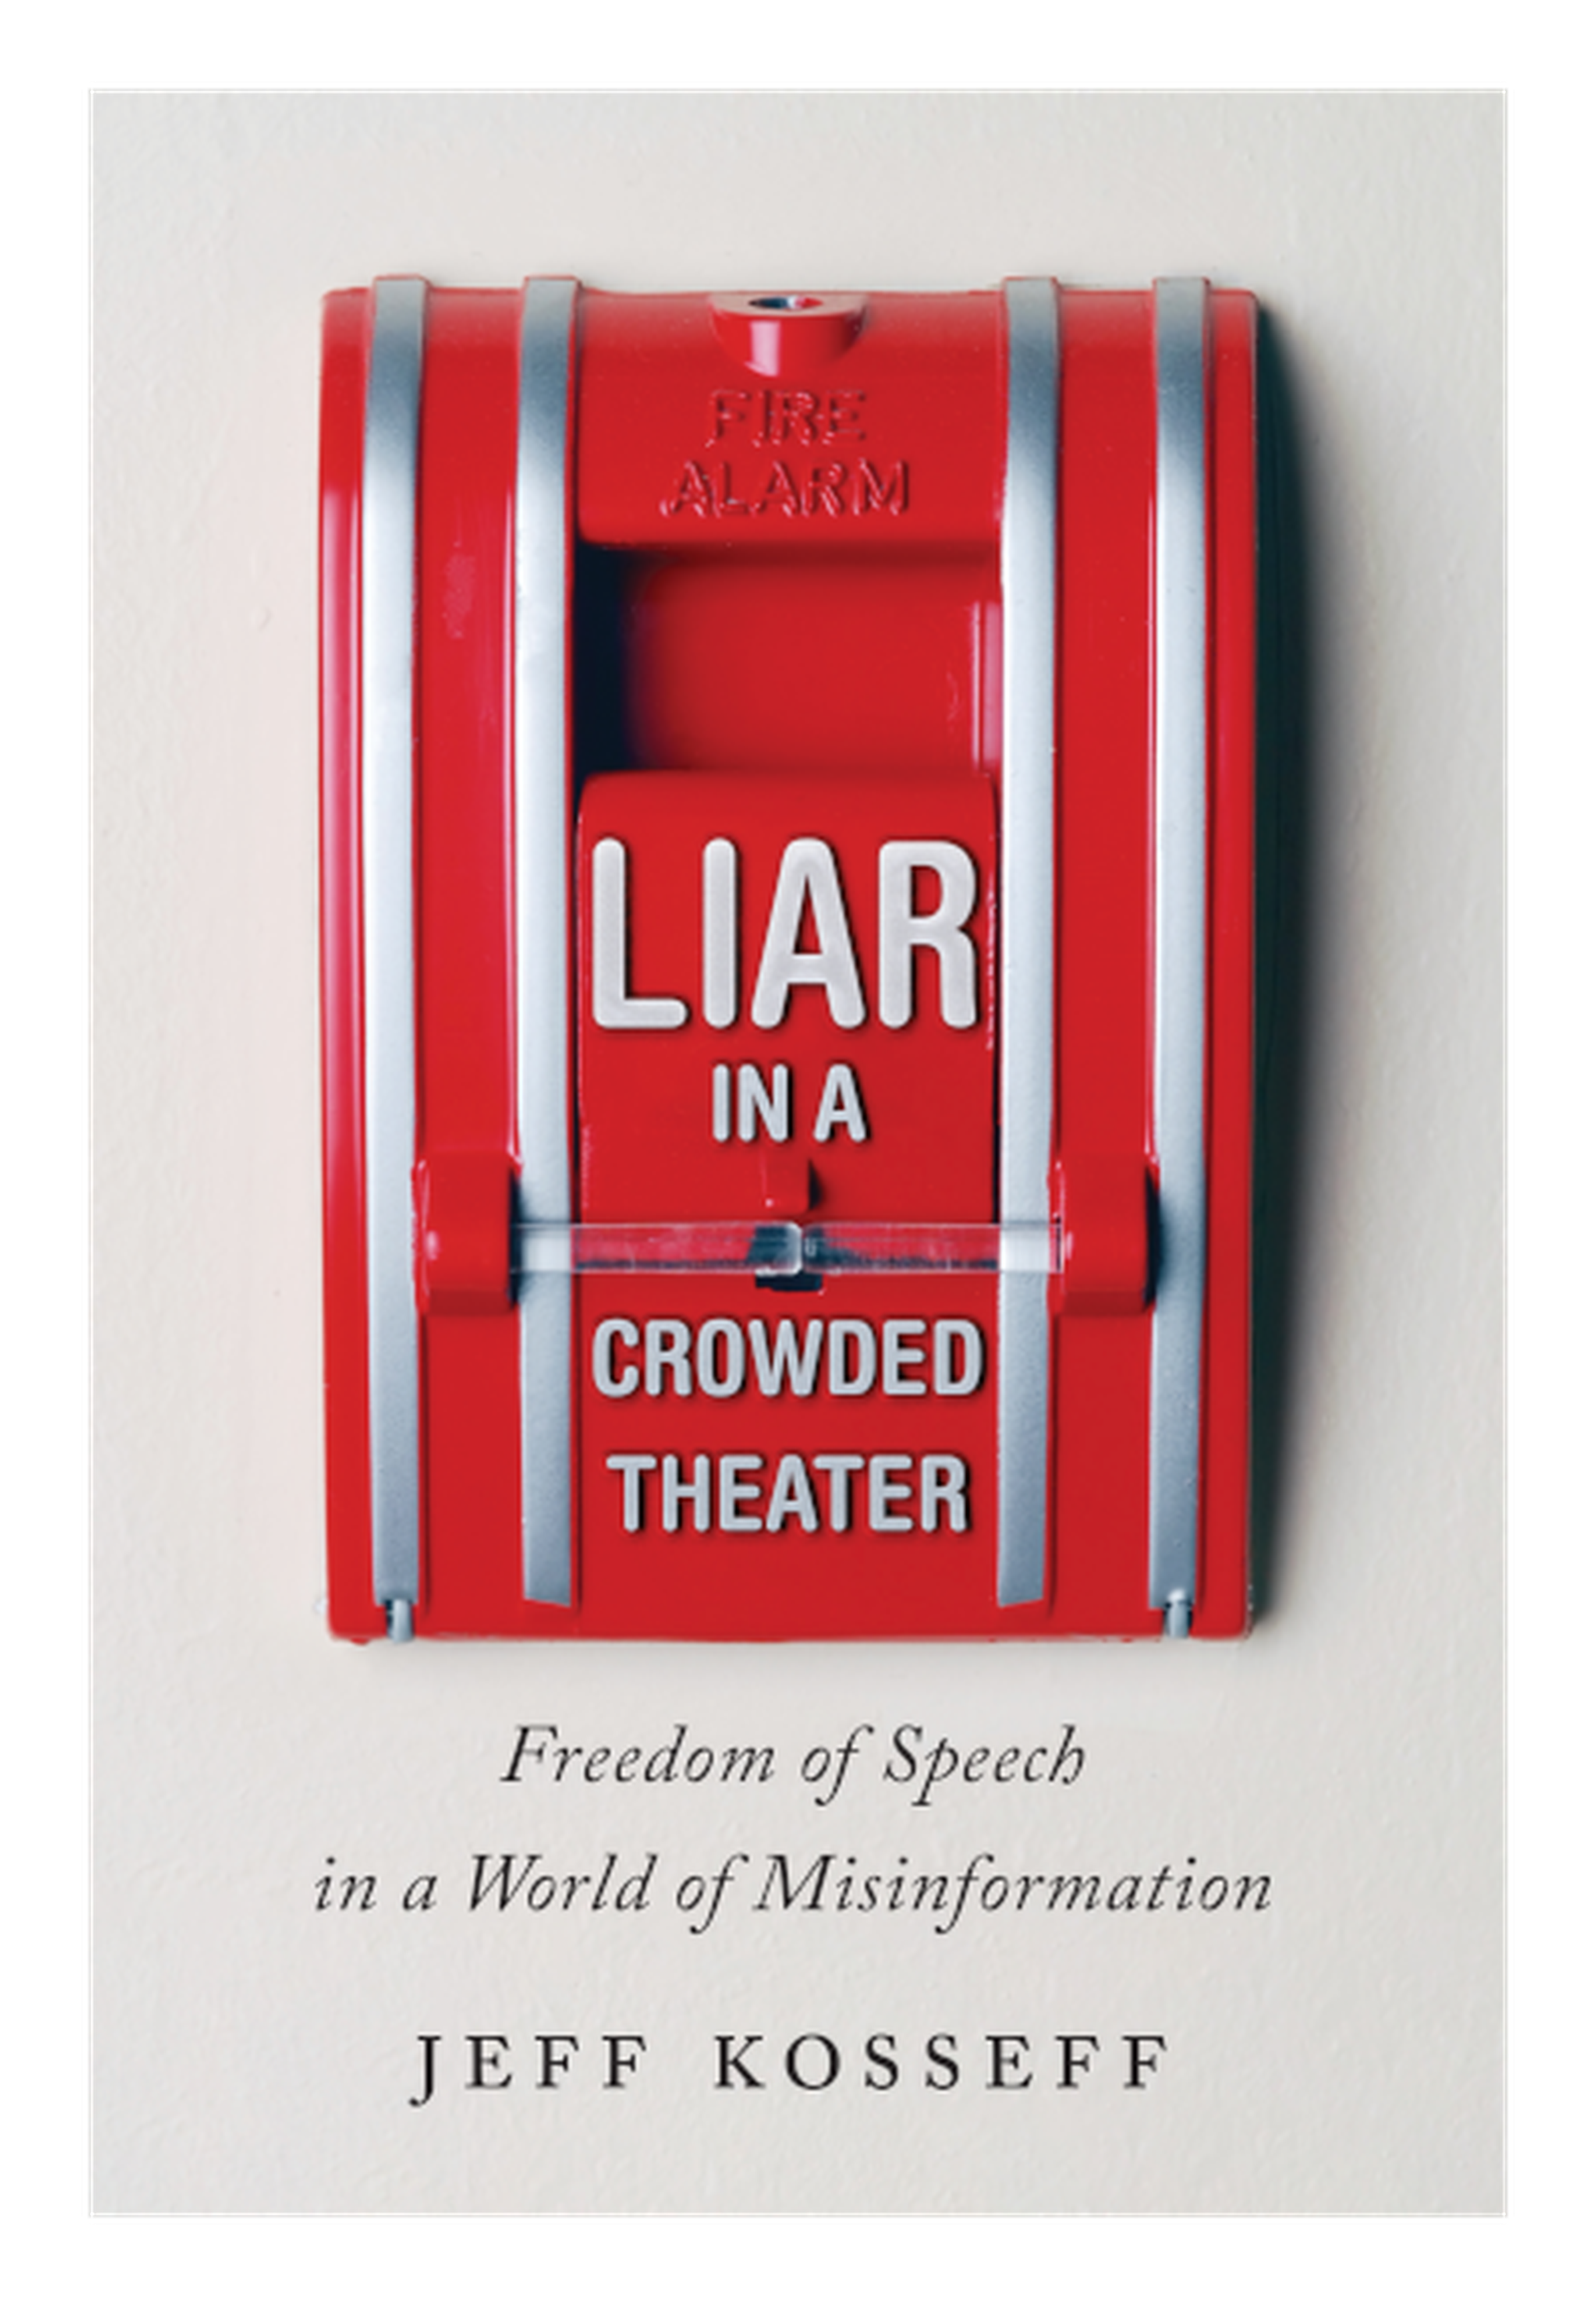 The book cover, featuring the title “Liar in a Crowded Theater” on an image of a fire alarm